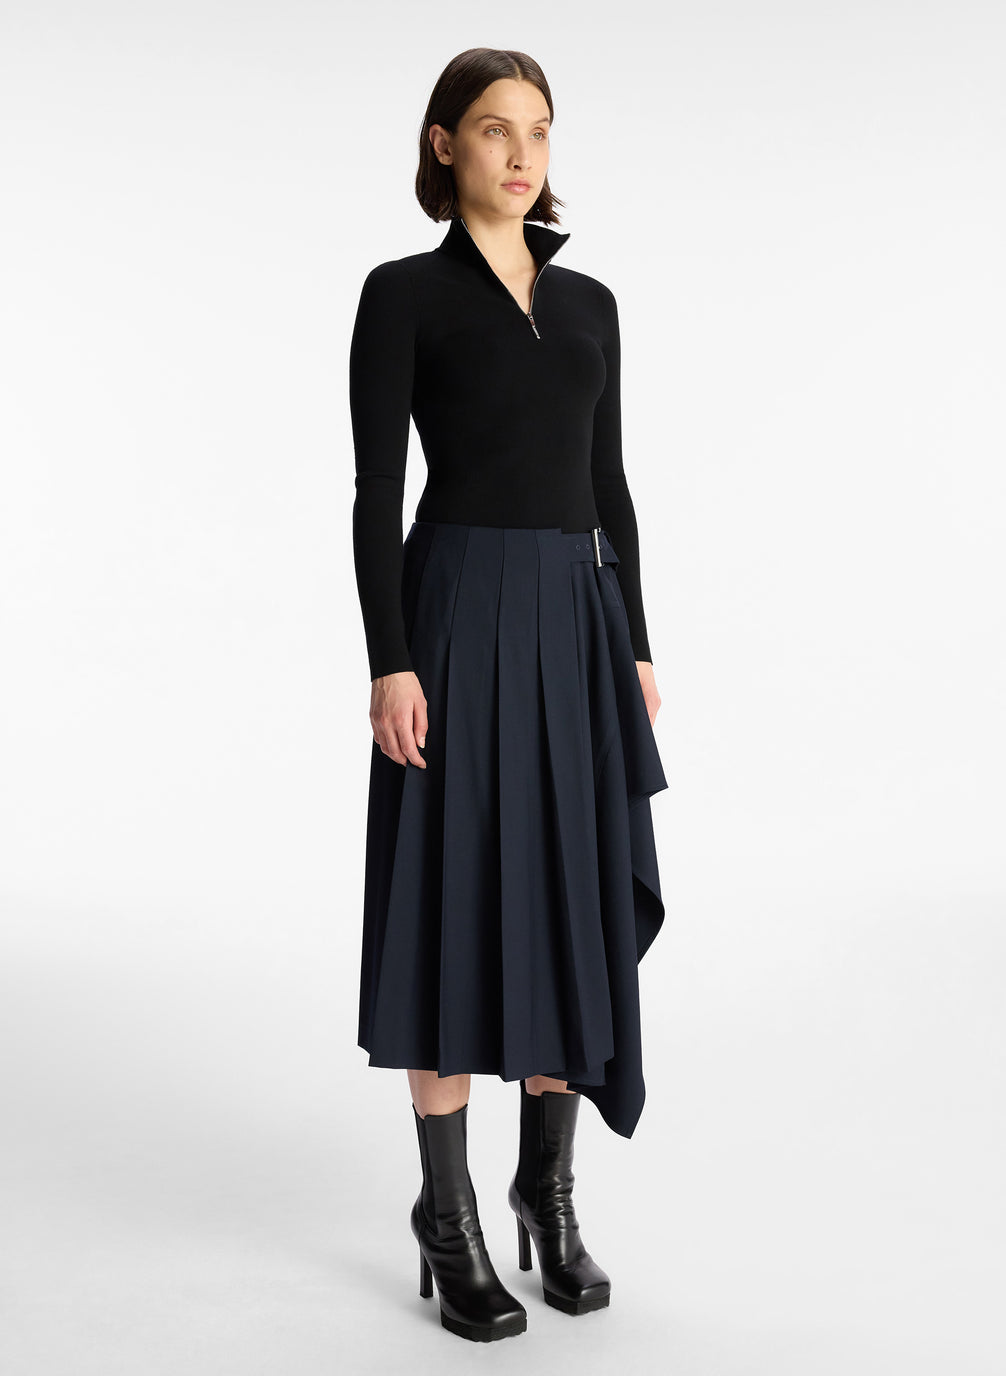 side view of woman in black long sleeve knit top and navy blue pleated skirt